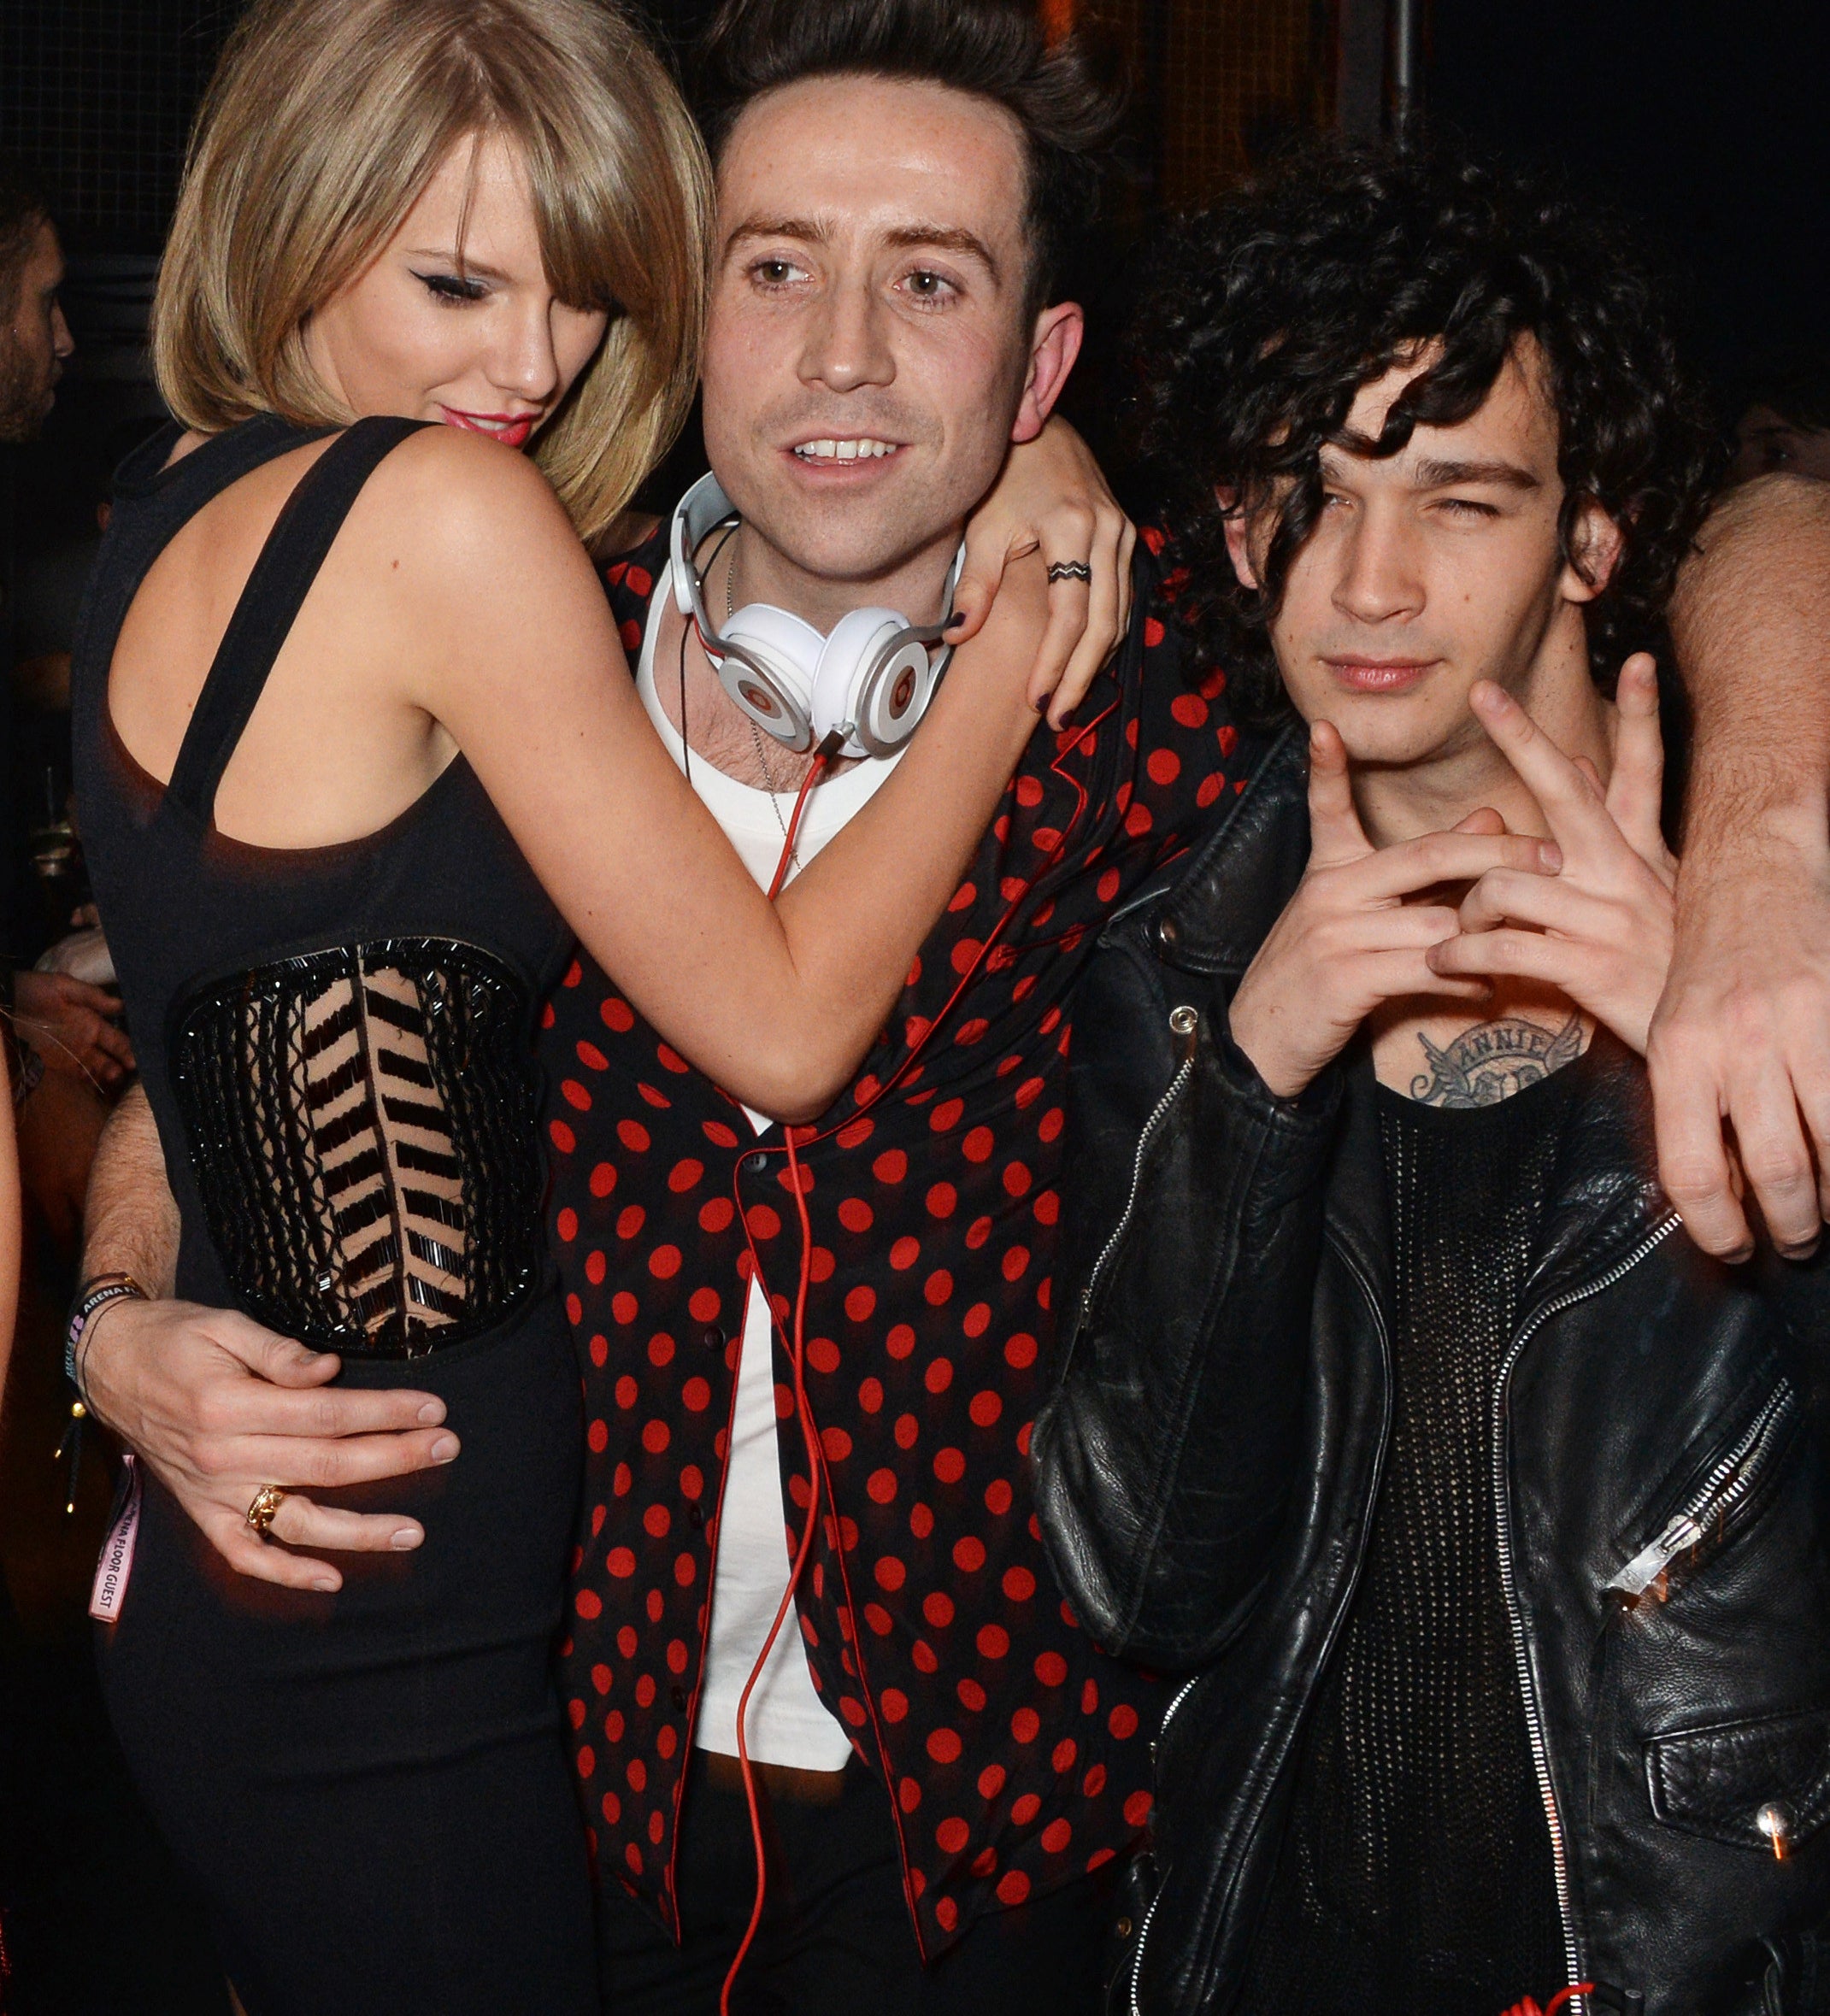 Taylor with Nick Grimshaw and Matty